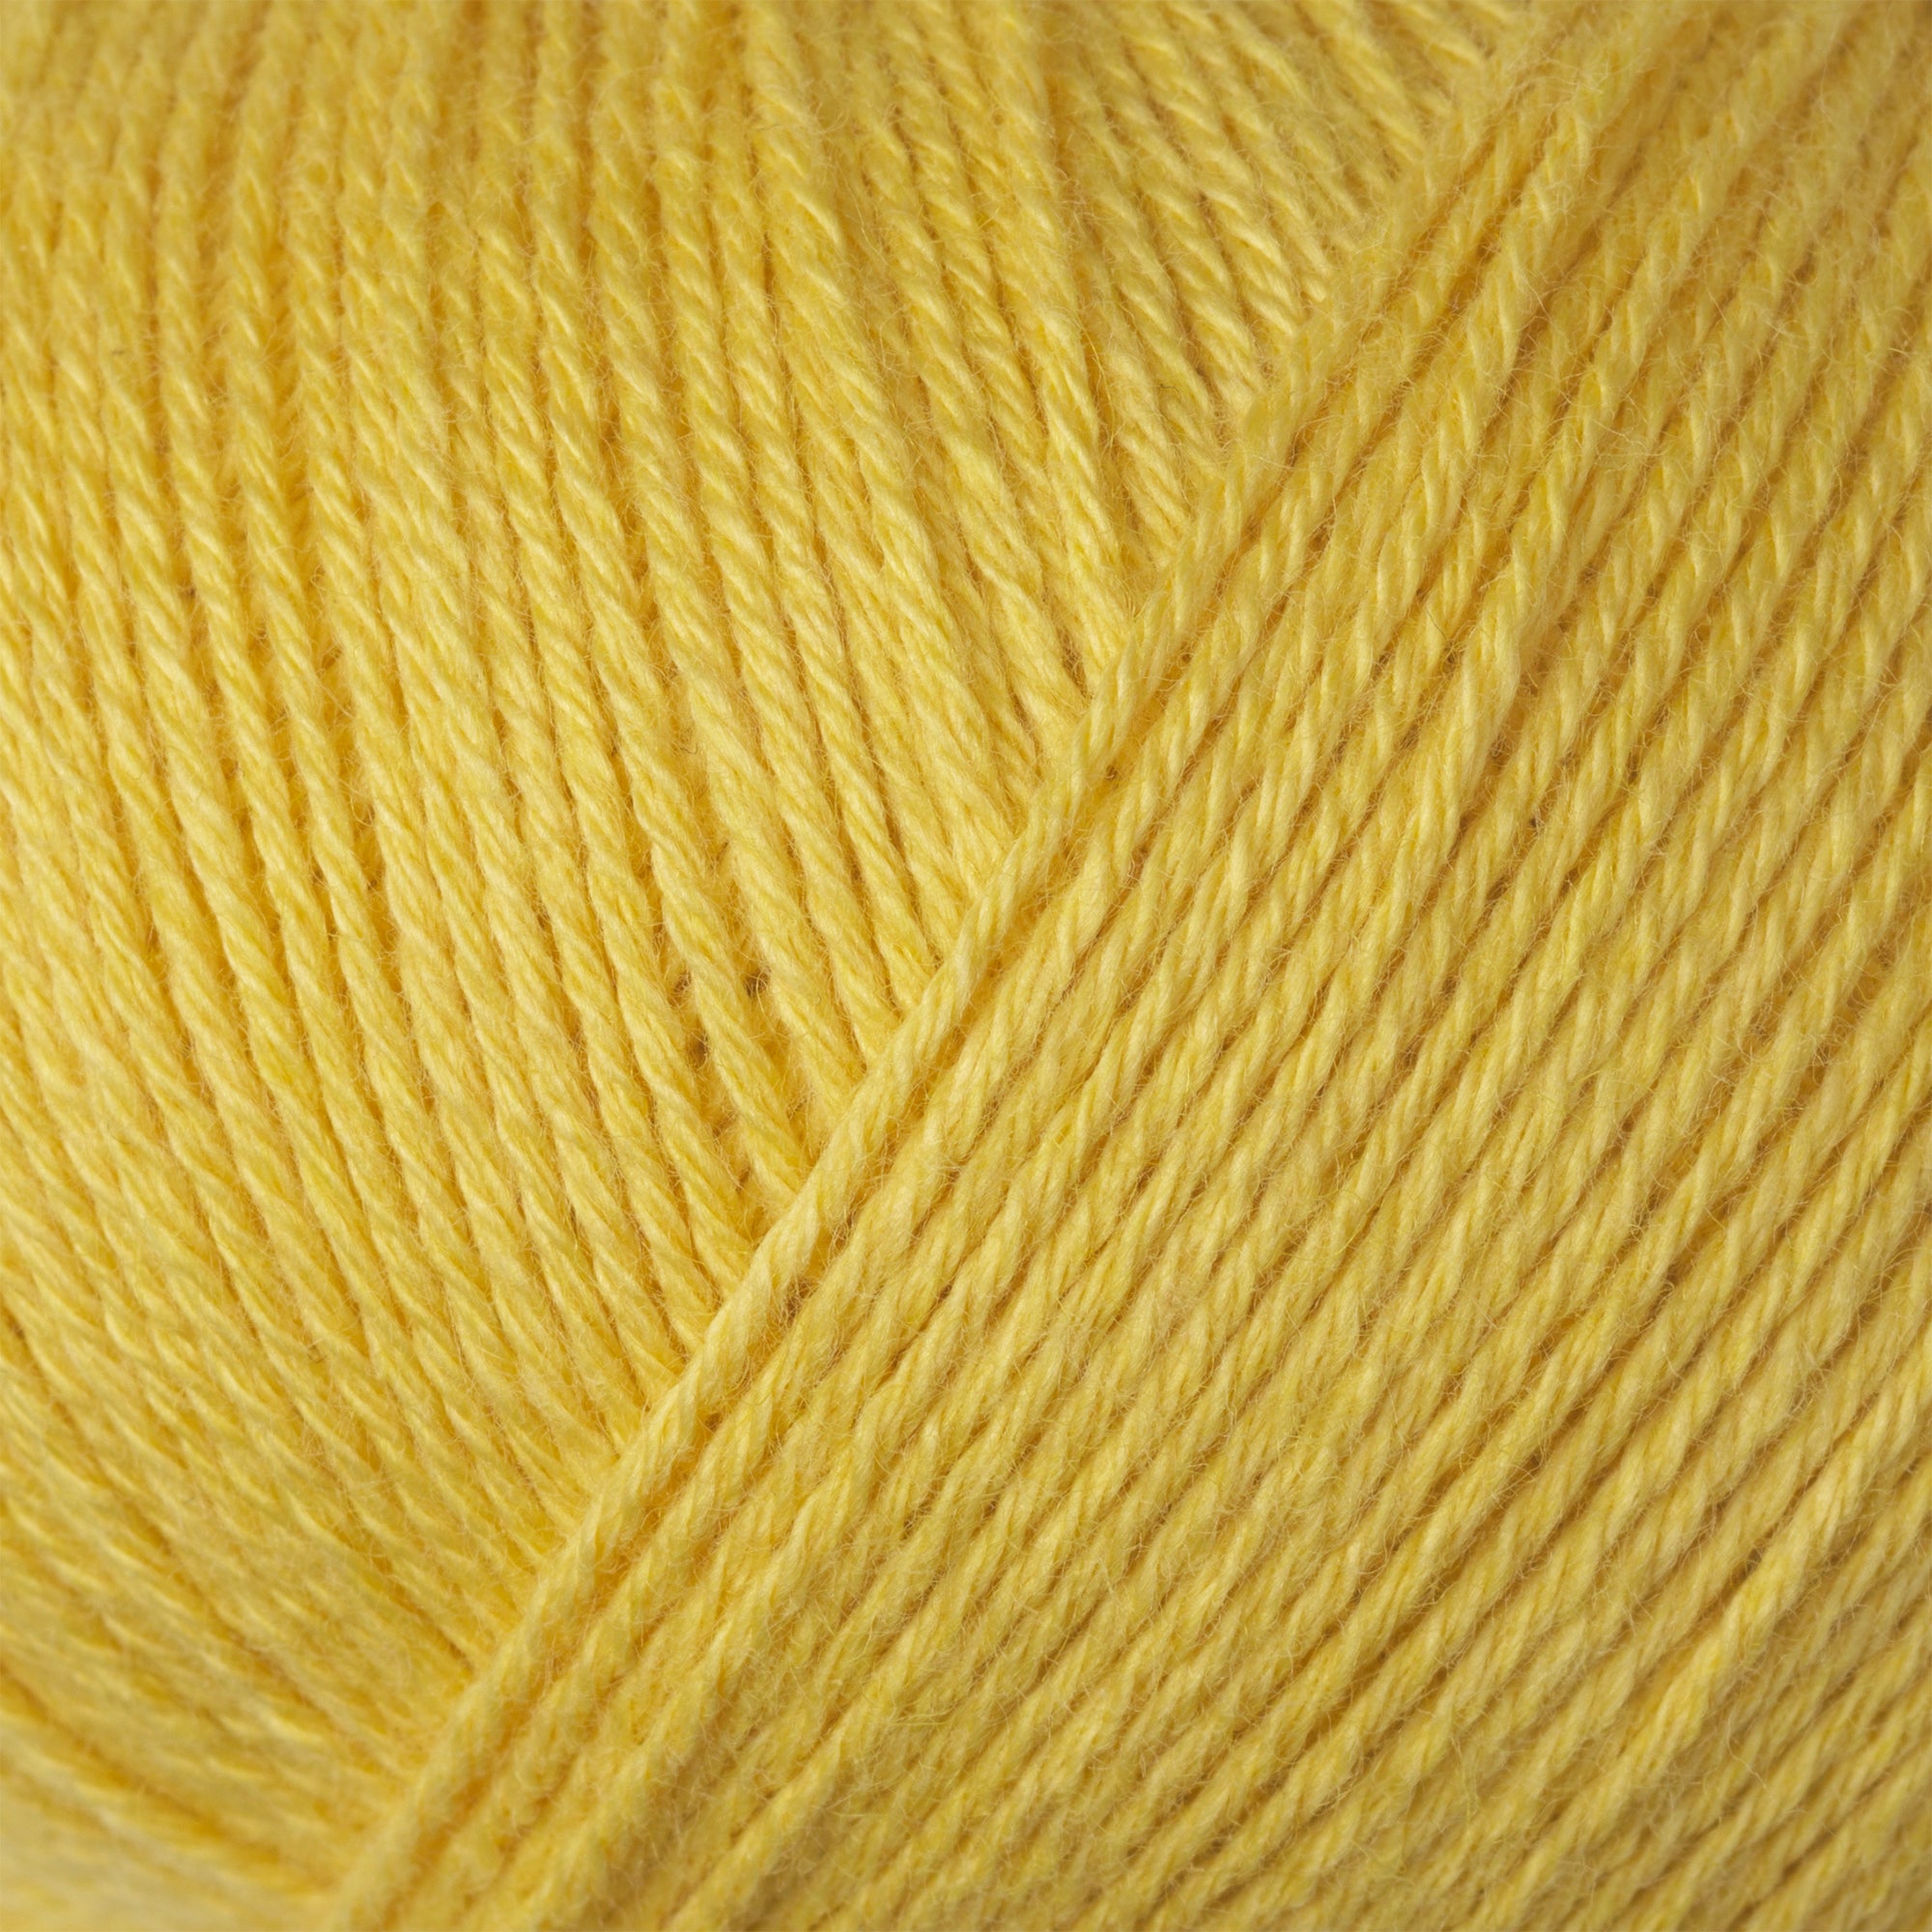 Knitting for Olive Cotton Merino - Buttercup